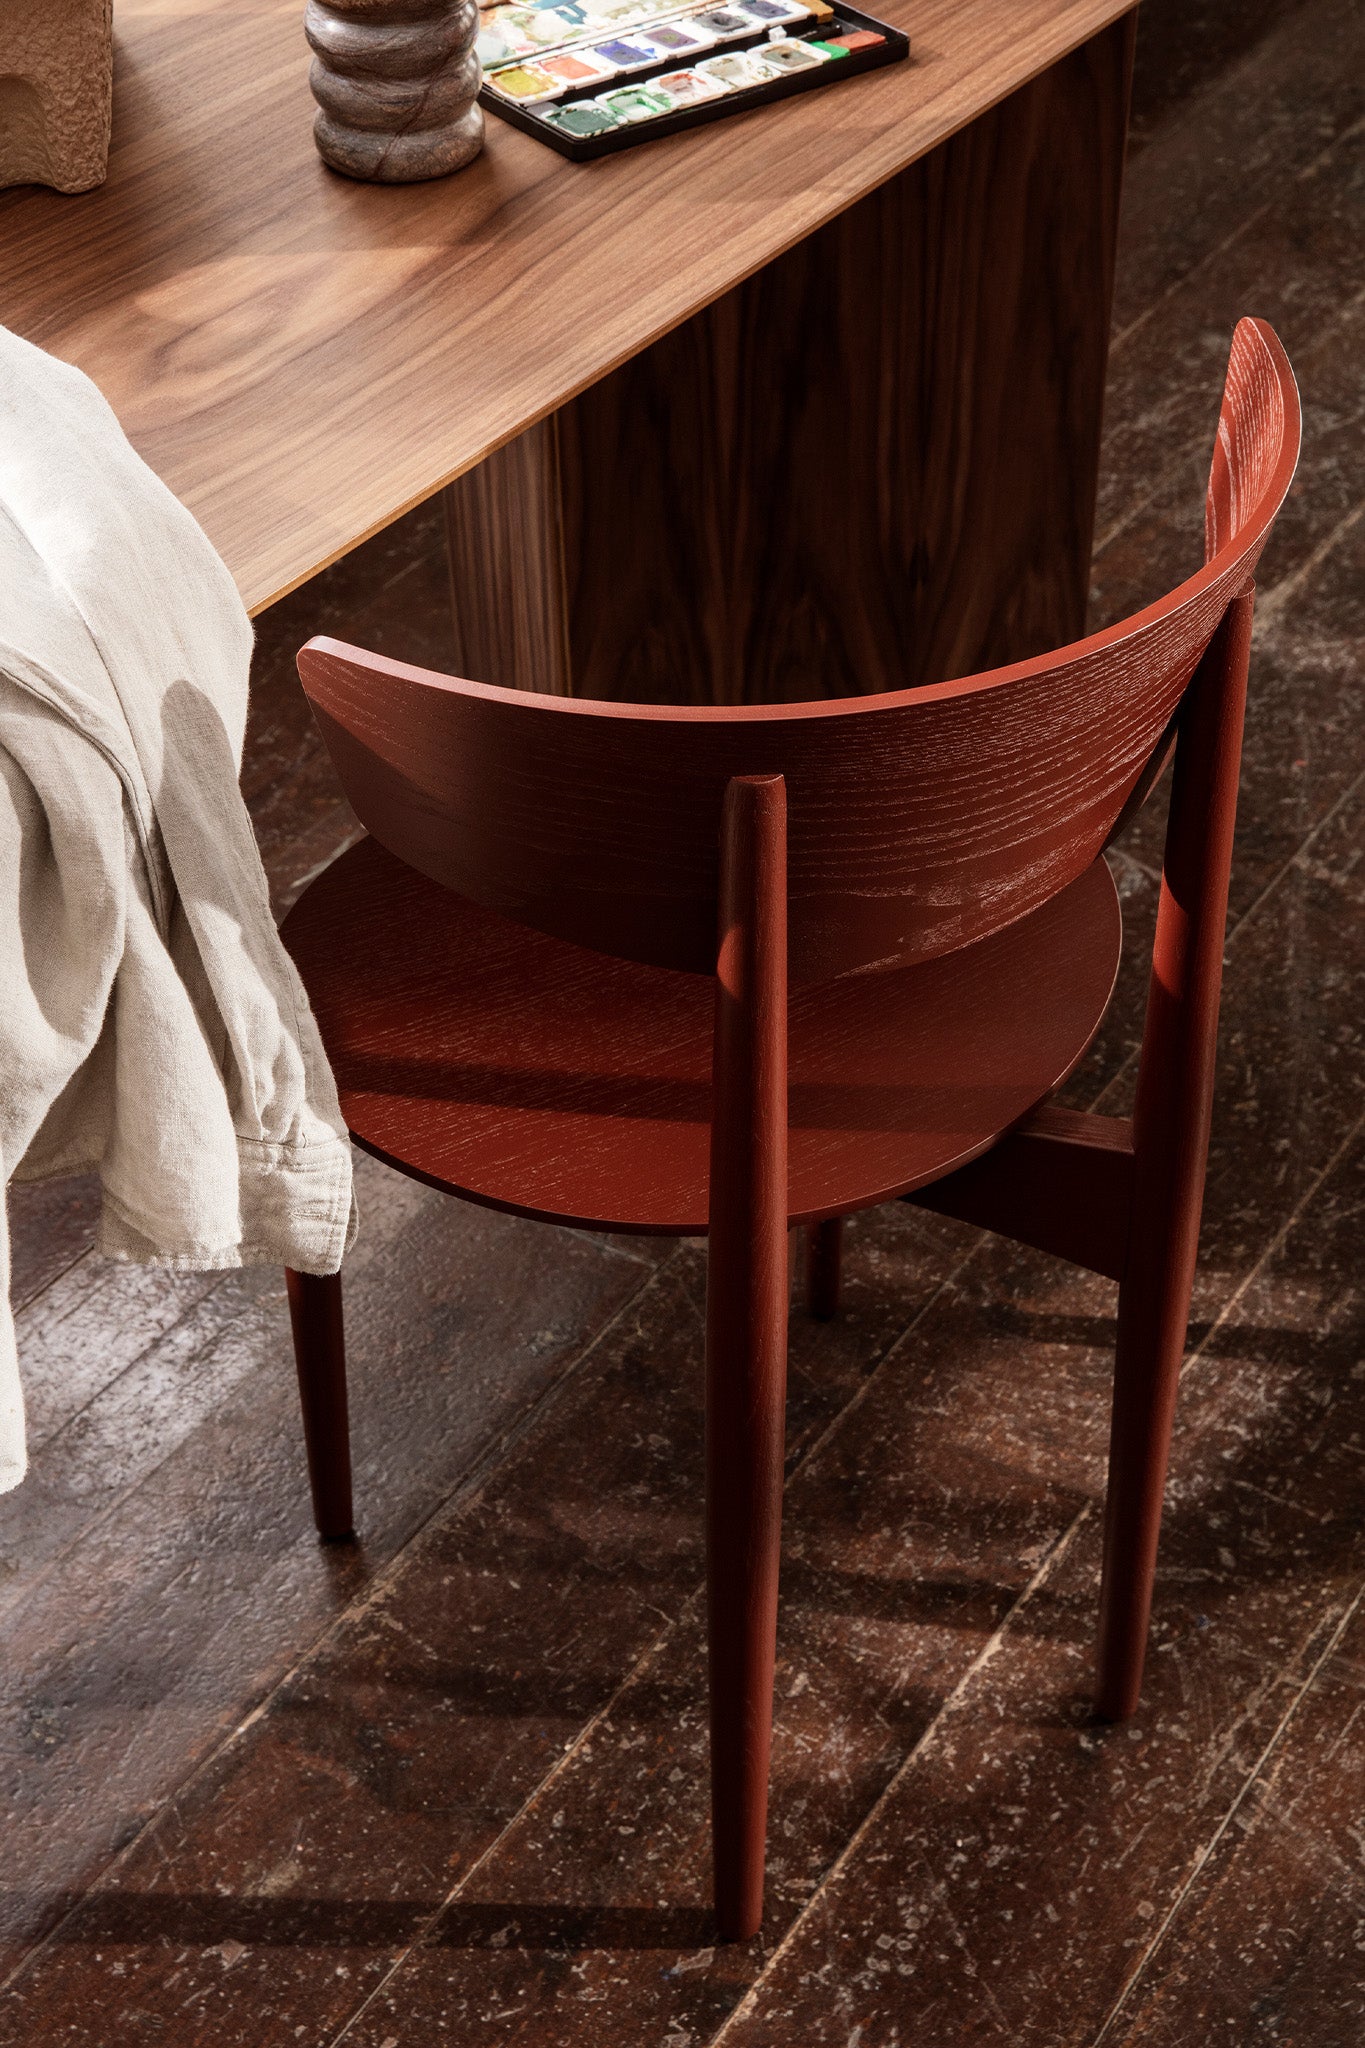 Herman Dining Chair Wood in Red Brown. Image by Ferm Living